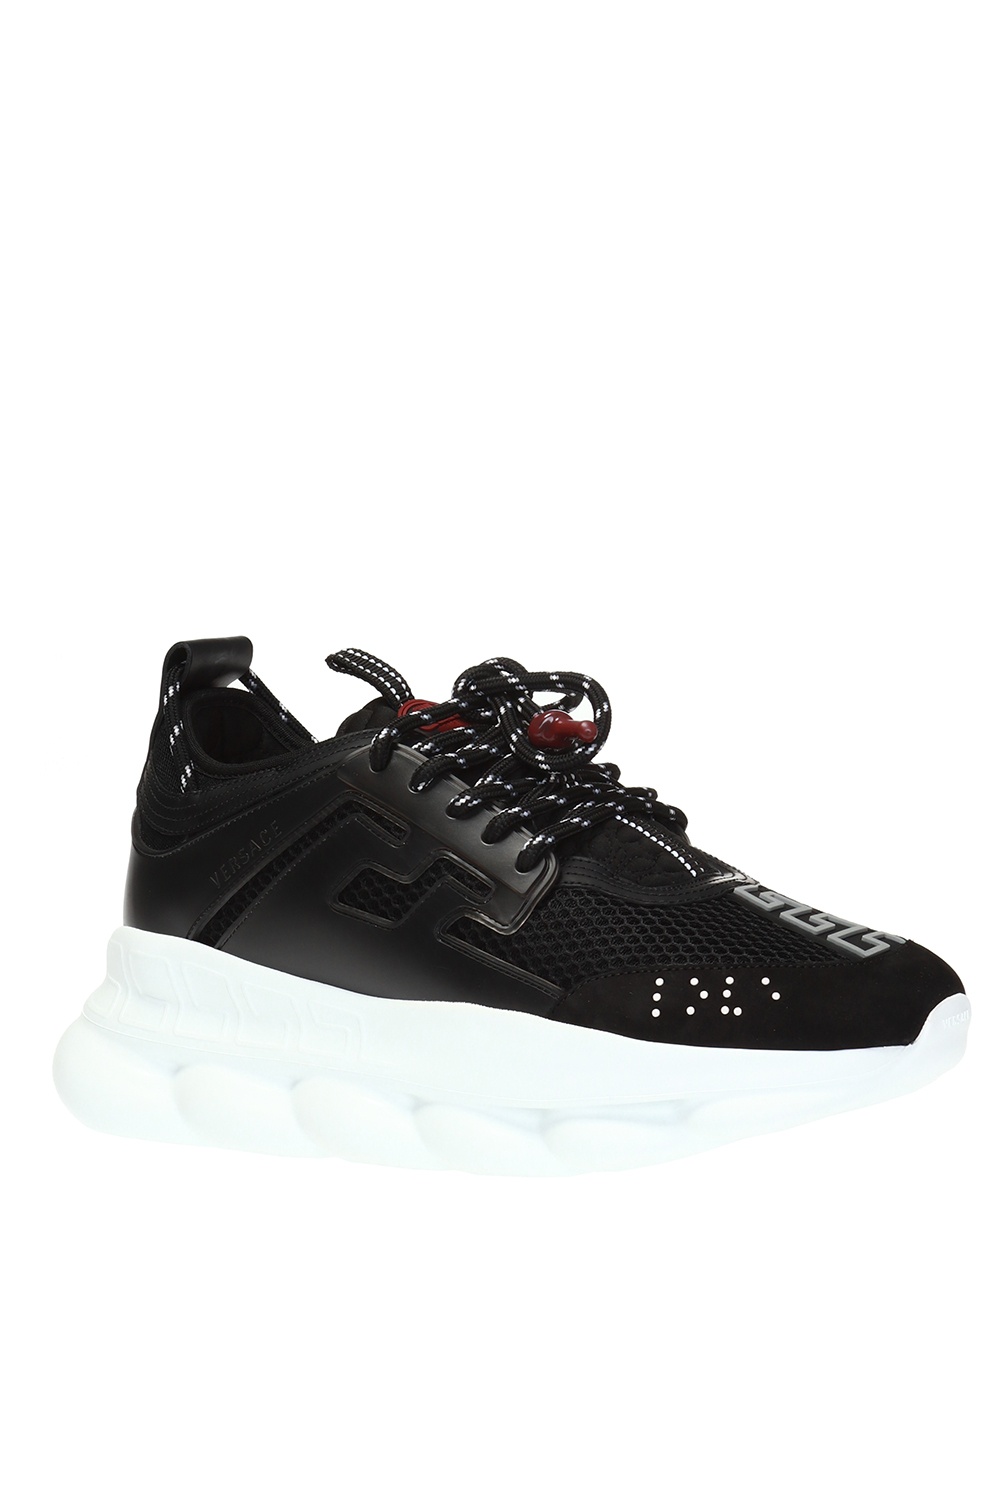 Versace, Shoes, Versace Chain Reaction Black White Sneakers